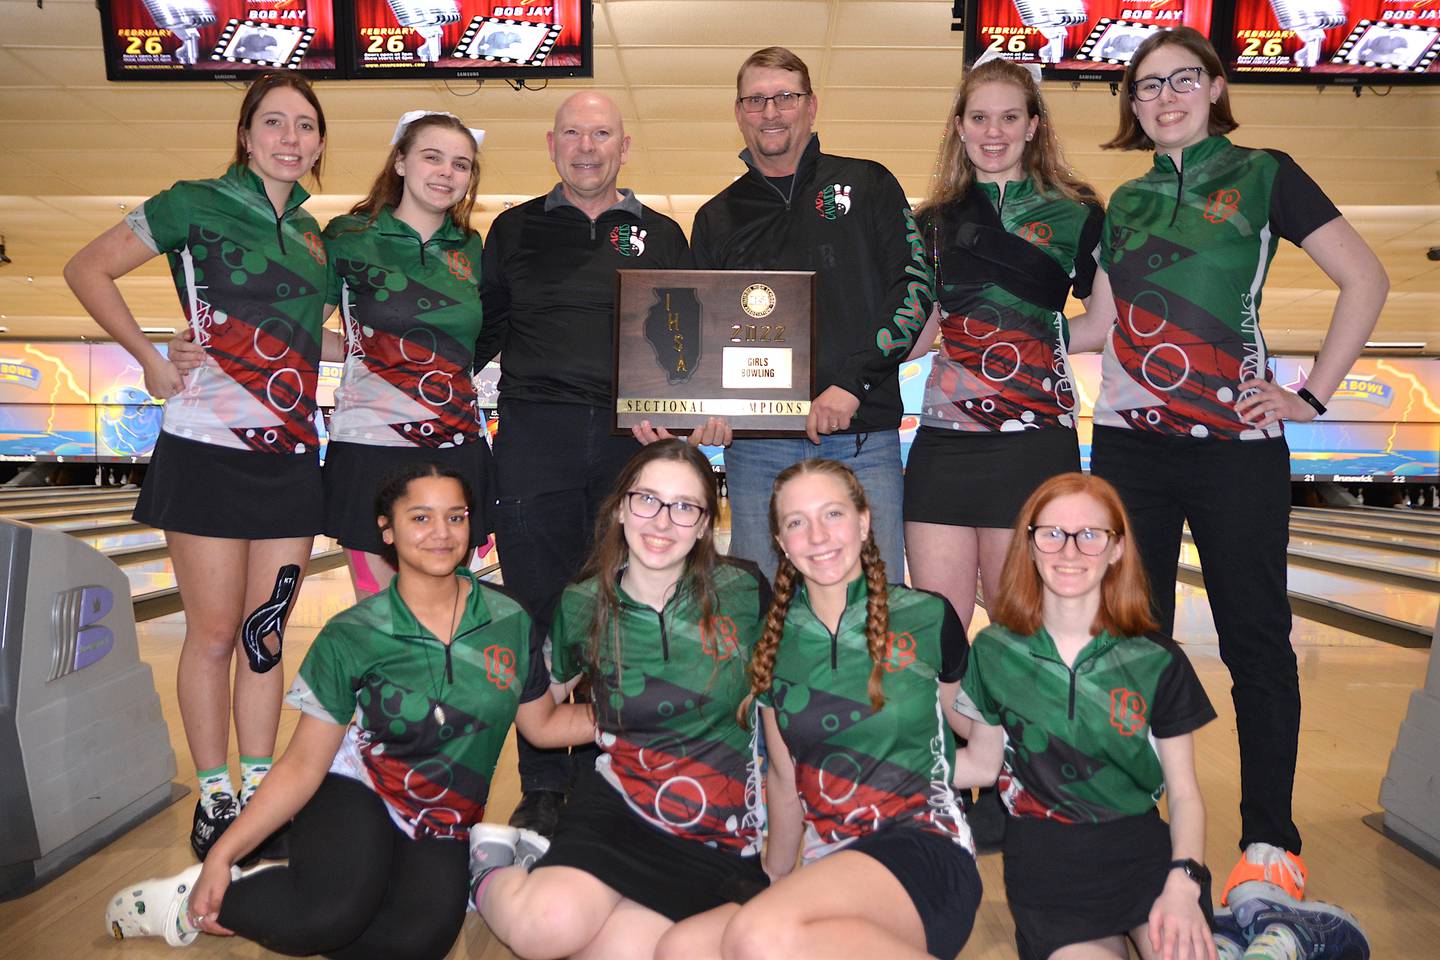 The La Salle-Peru girls bowling team on Saturday, Feb. 12, 2022, captured the championship of the La Salle-Peru Sectional at Illinois Valley Super Bowl.